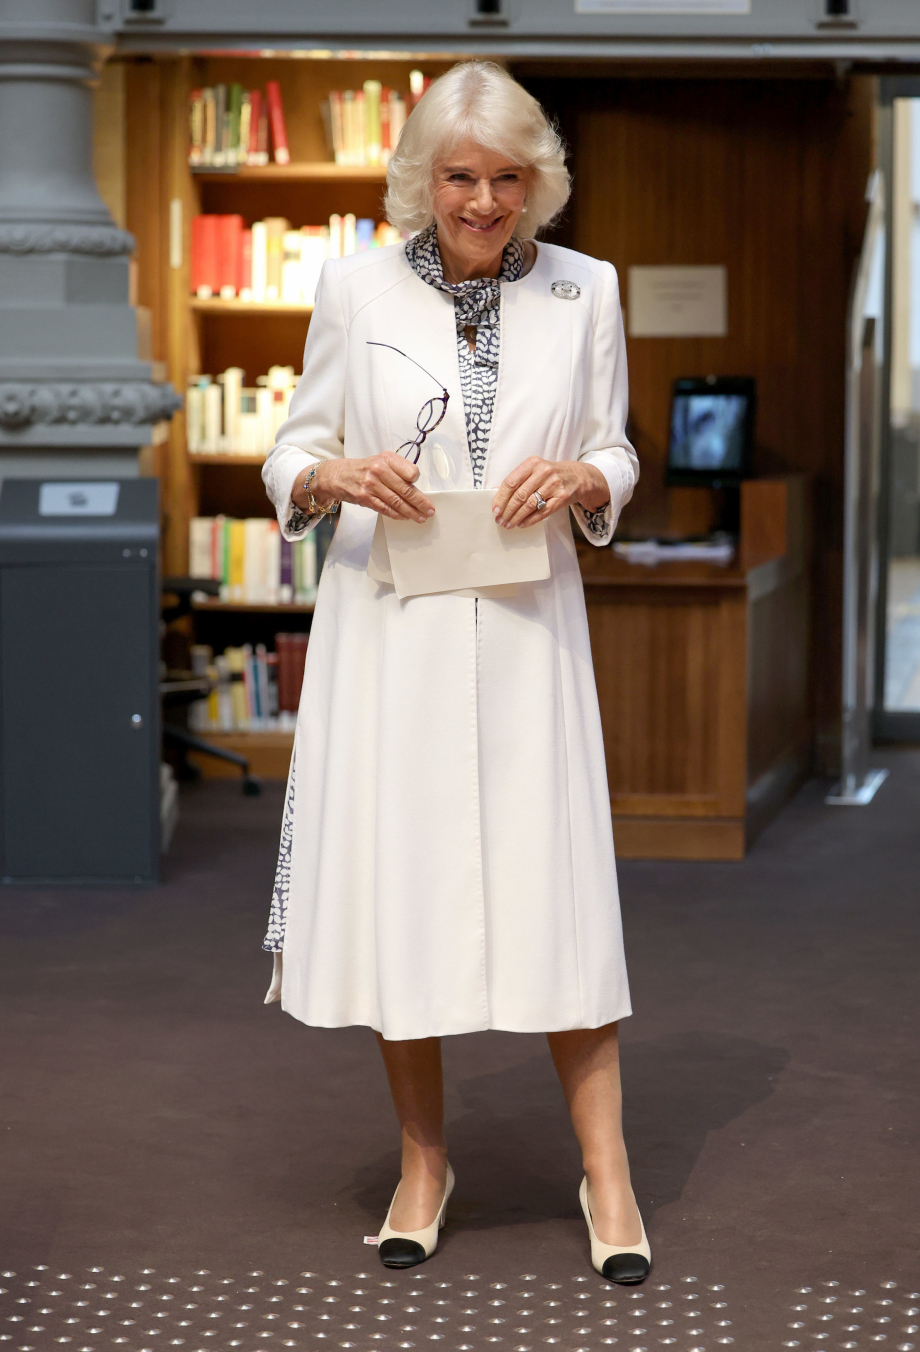 The Queen at the Bibliotheque Nationale